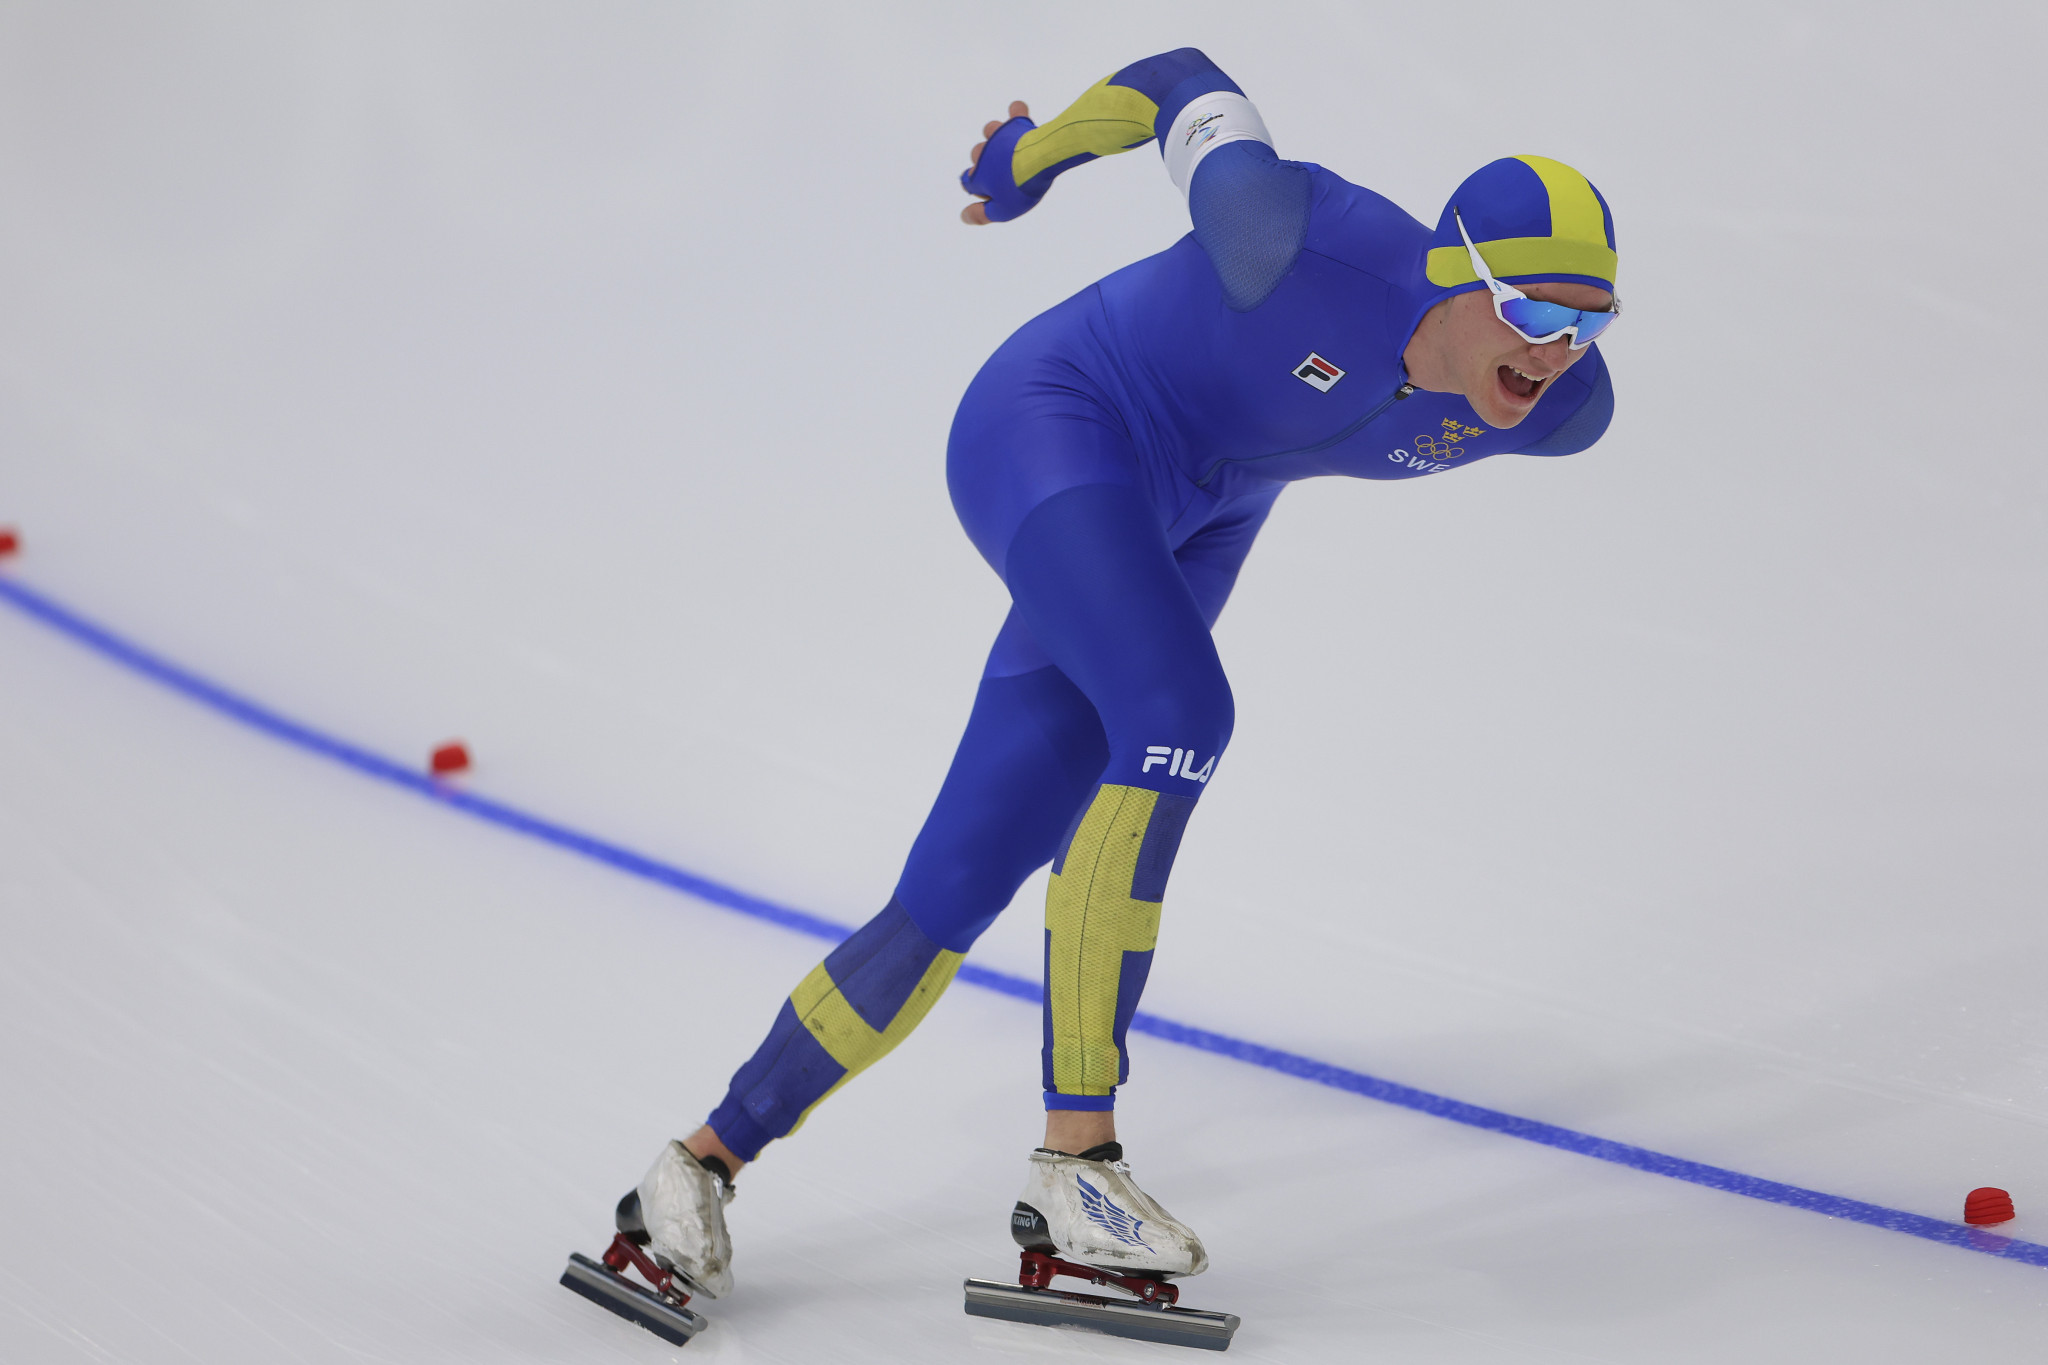 Nils van der Poel set a world record at National Speed Skating Oval during Beijing 2022 ©Getty Images